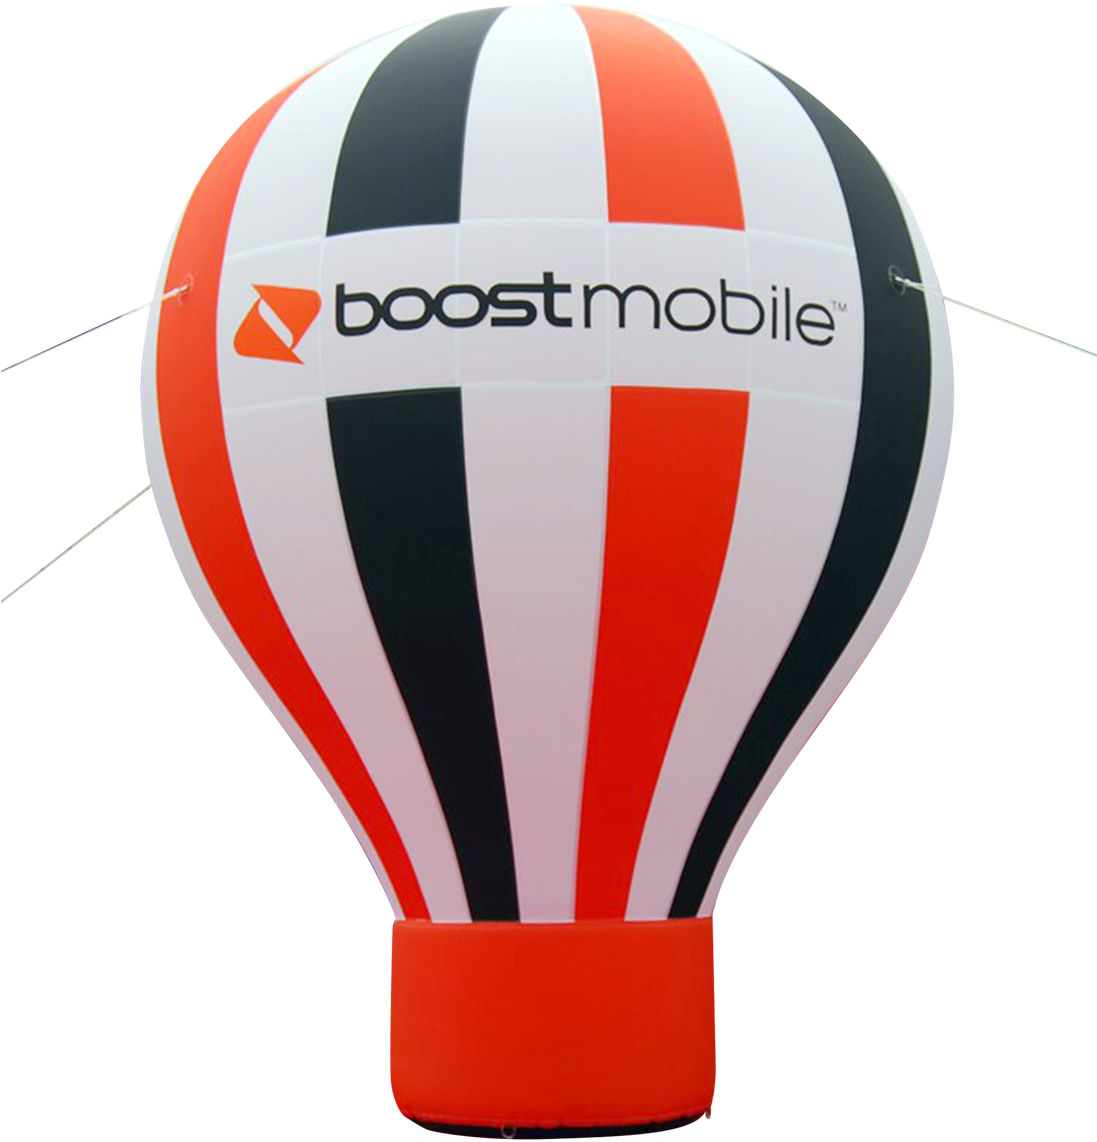 Boost Mobile Giant Inflatable Advertising Balloon - Hot Air Balloon (1096x1280), Png Download